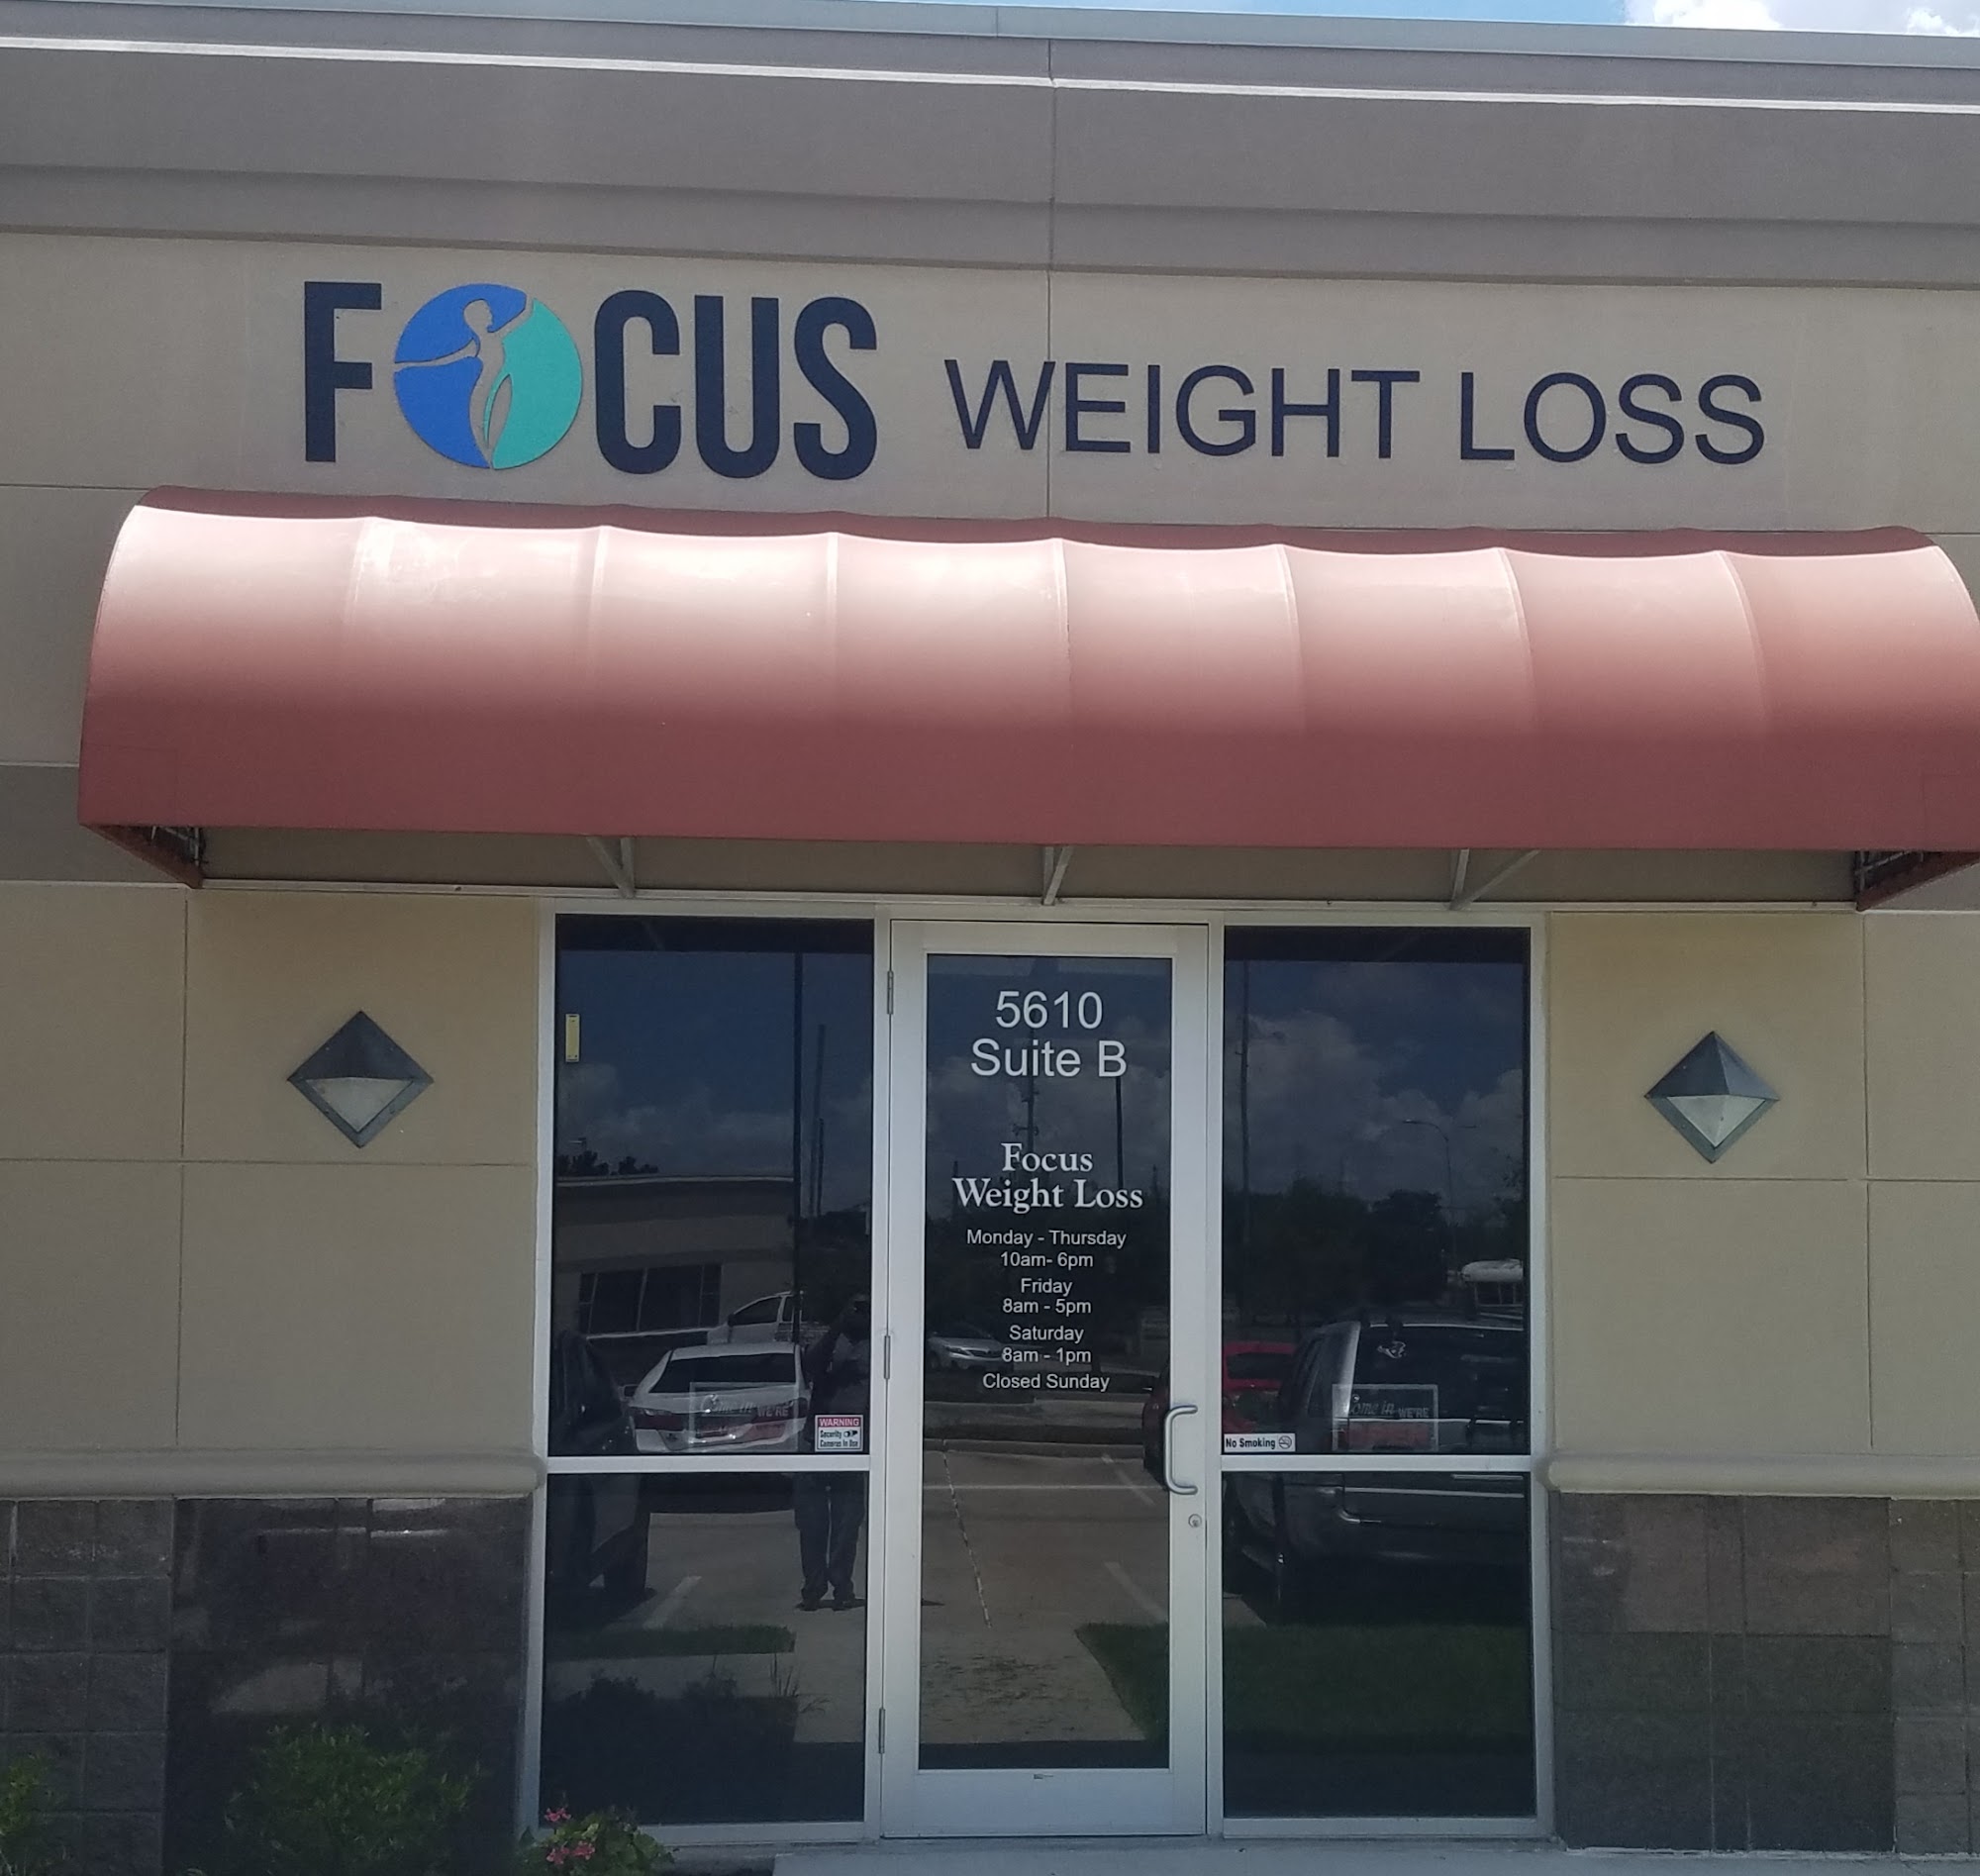 Focus Weight Loss Club